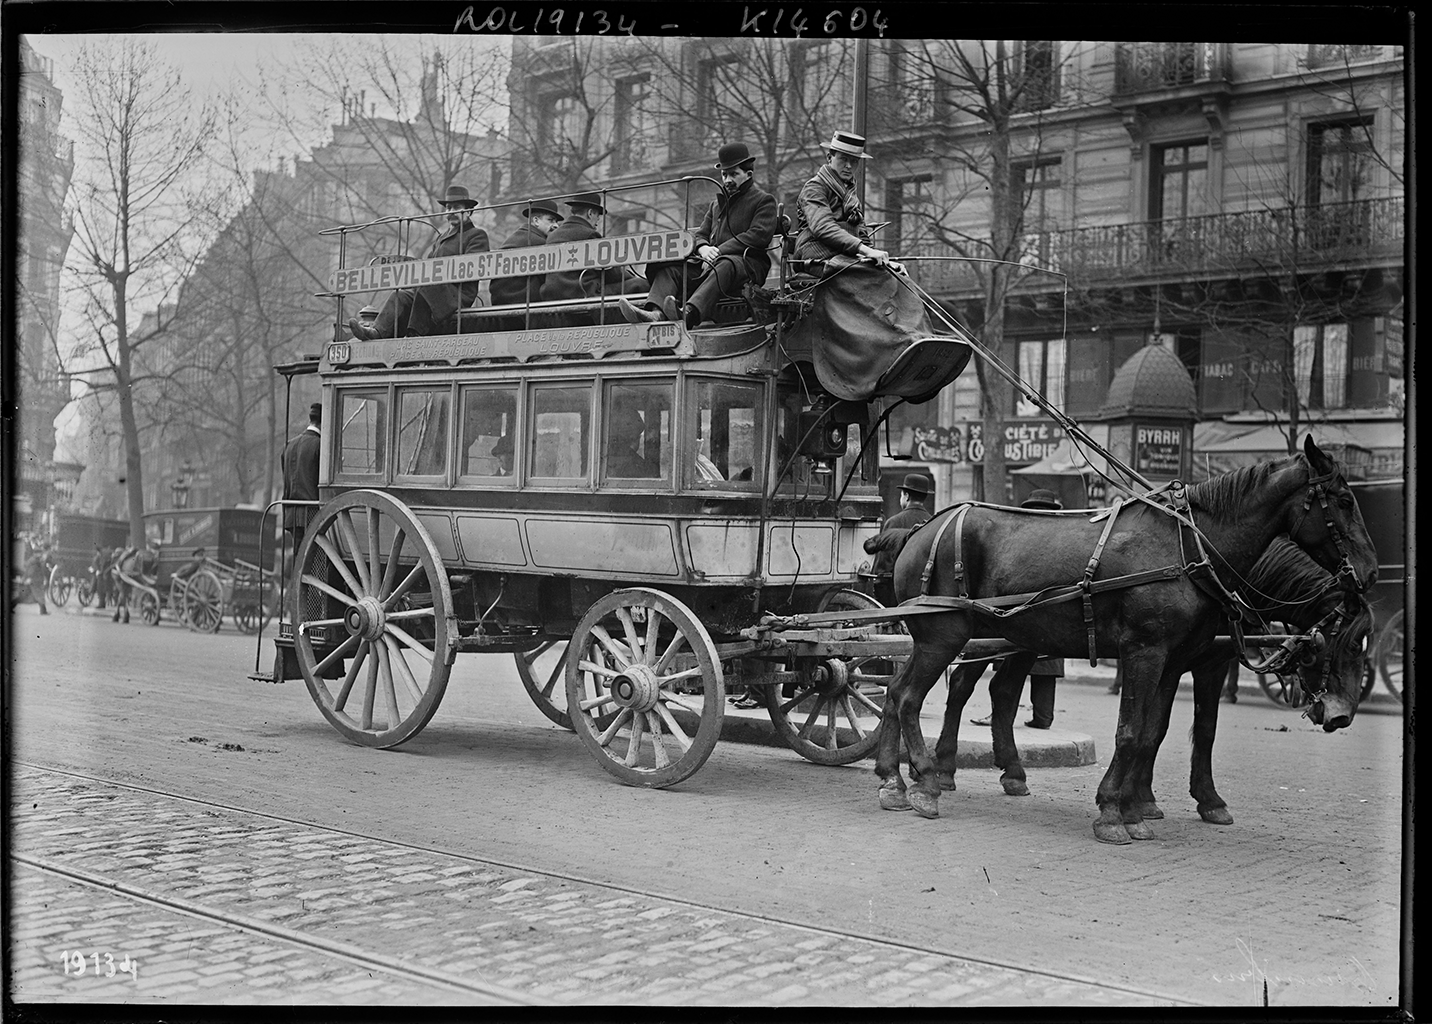 A black and white photograph of a light-colored carriage bring pulled by two dark colored horses on a road. The carriage has men sitting on the top of it while there appears to people sitting inside it as well. A man wearing a flat hat with a long gray dress or blanket over his legs. In the background, there is the façade of a building with windows and fences. There are also other horse carriages parked along the road.